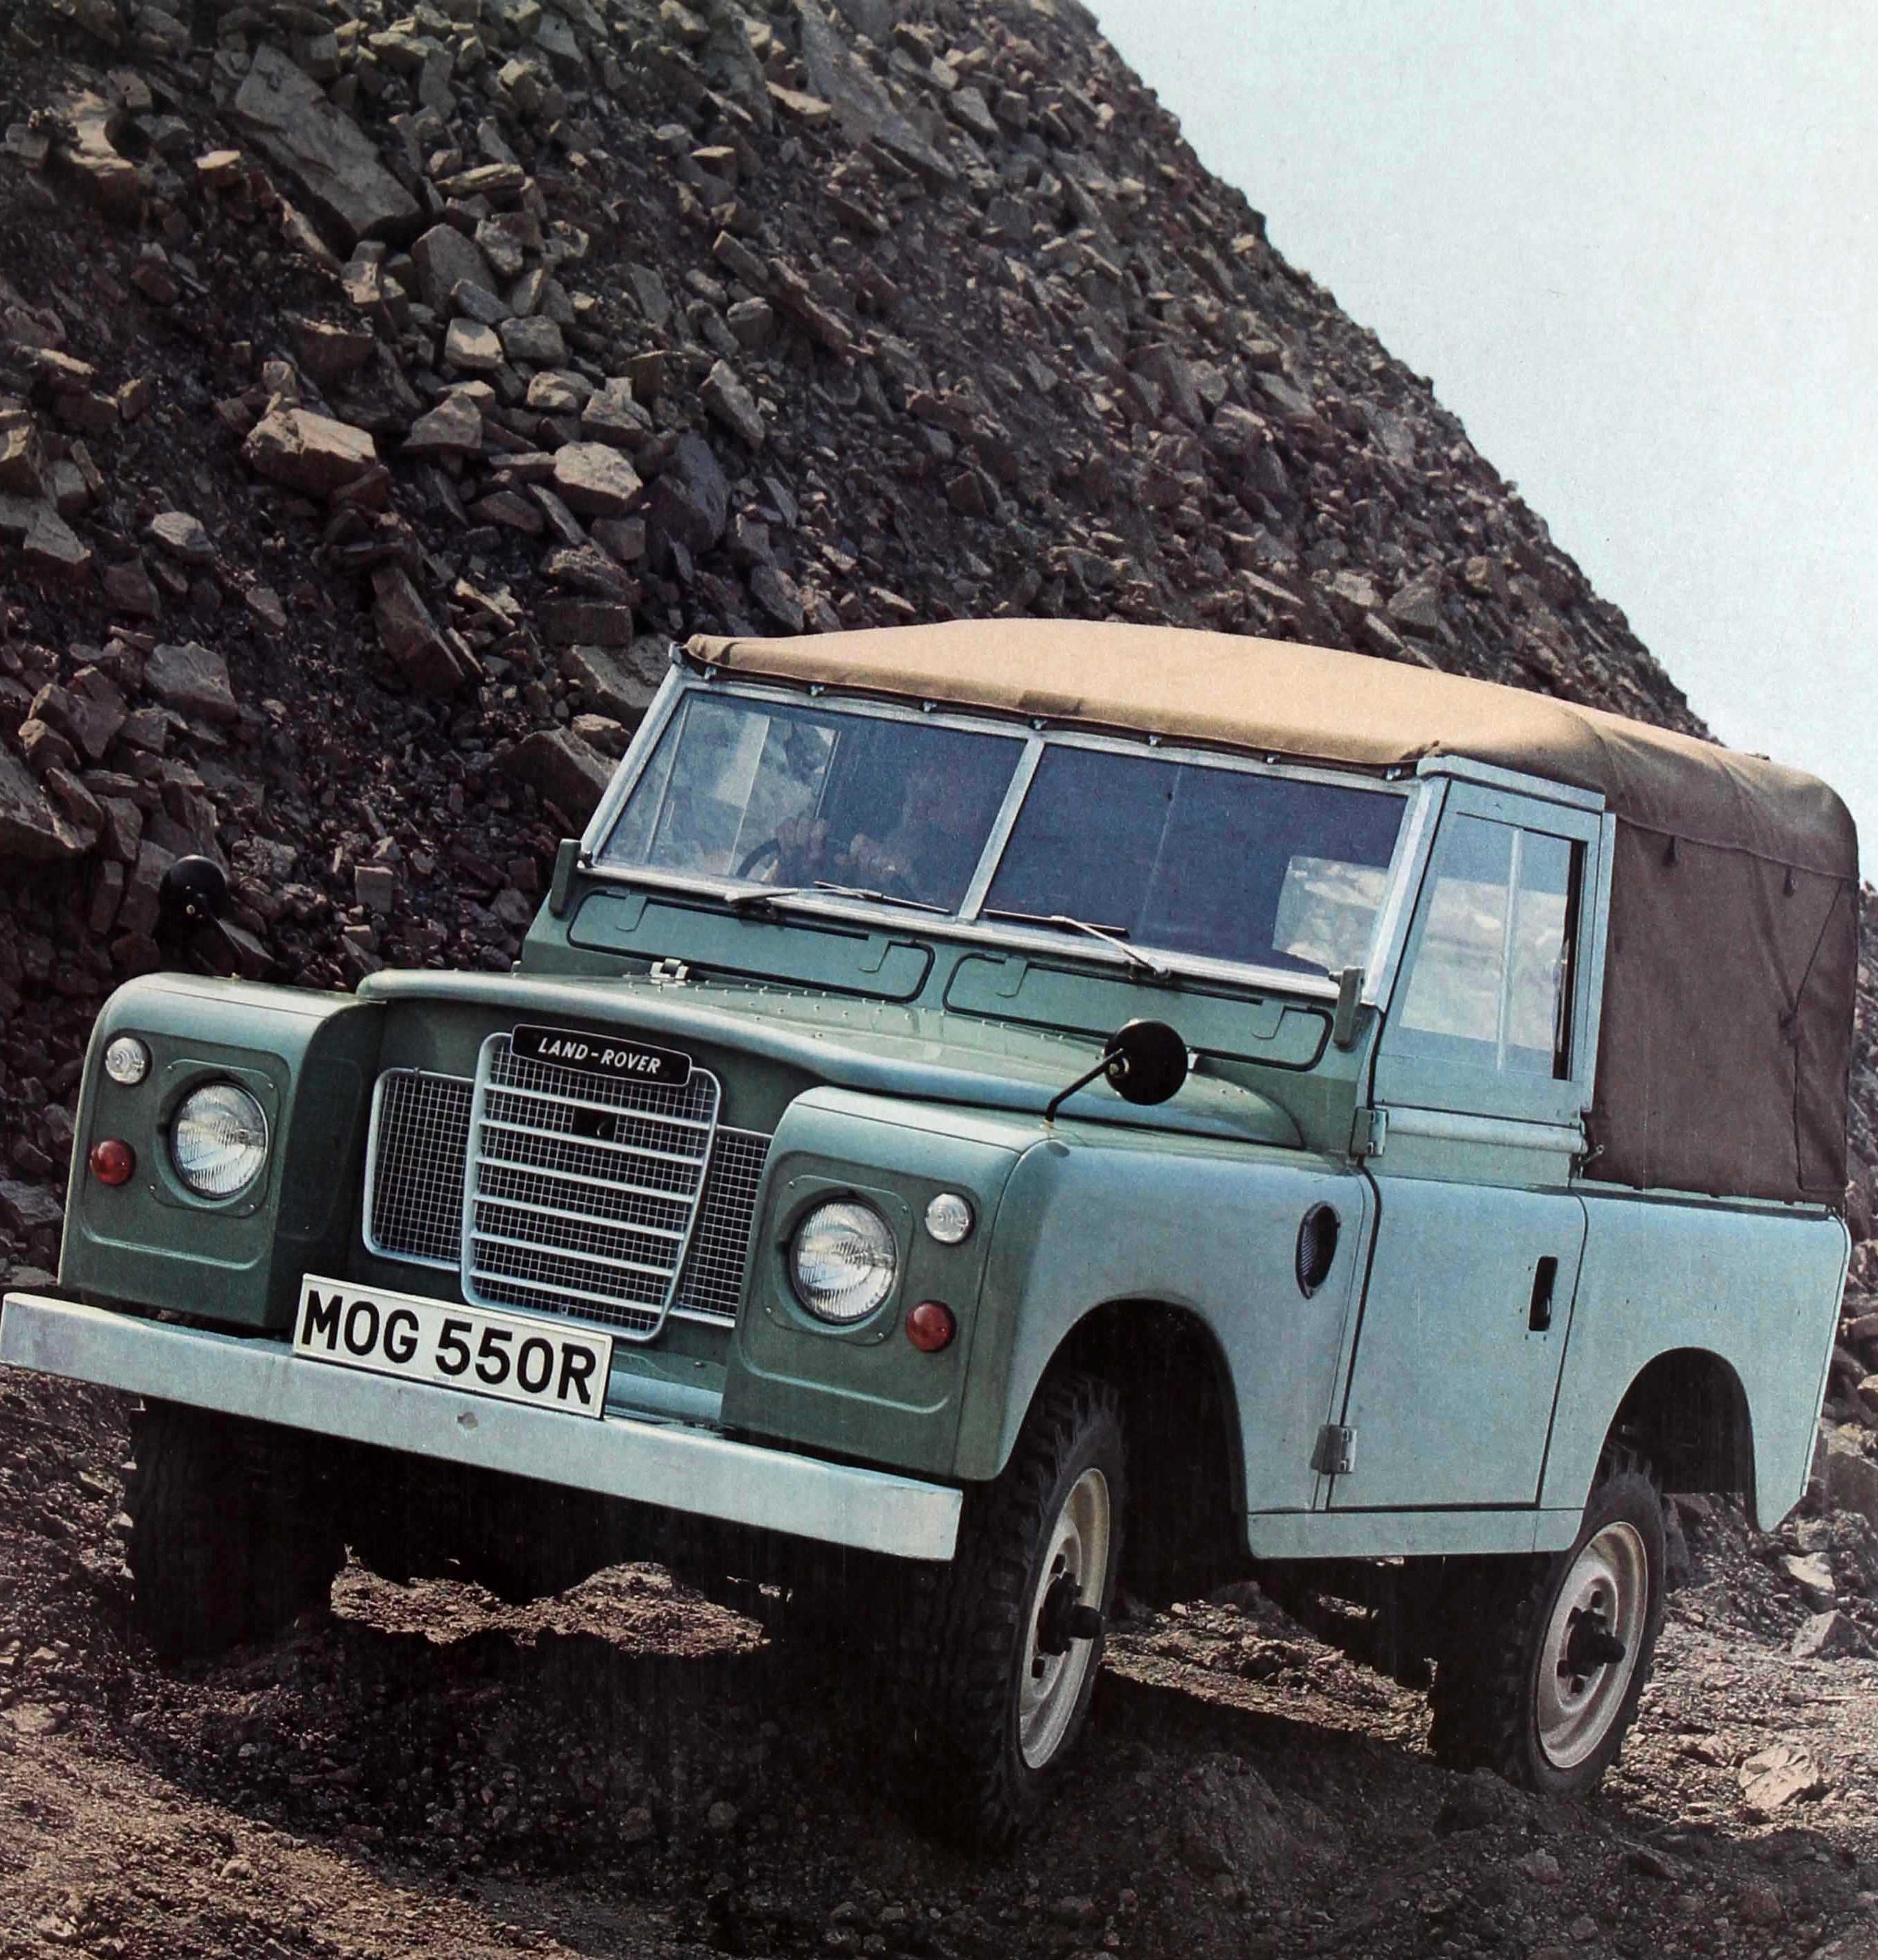 Original vintage Land Rover car advertising poster featuring a color photograph of a green Land Rover series III with the registration MOG 550 R driving through a rocky quarry with the heading in bold white letters below next to the Leyland logo in